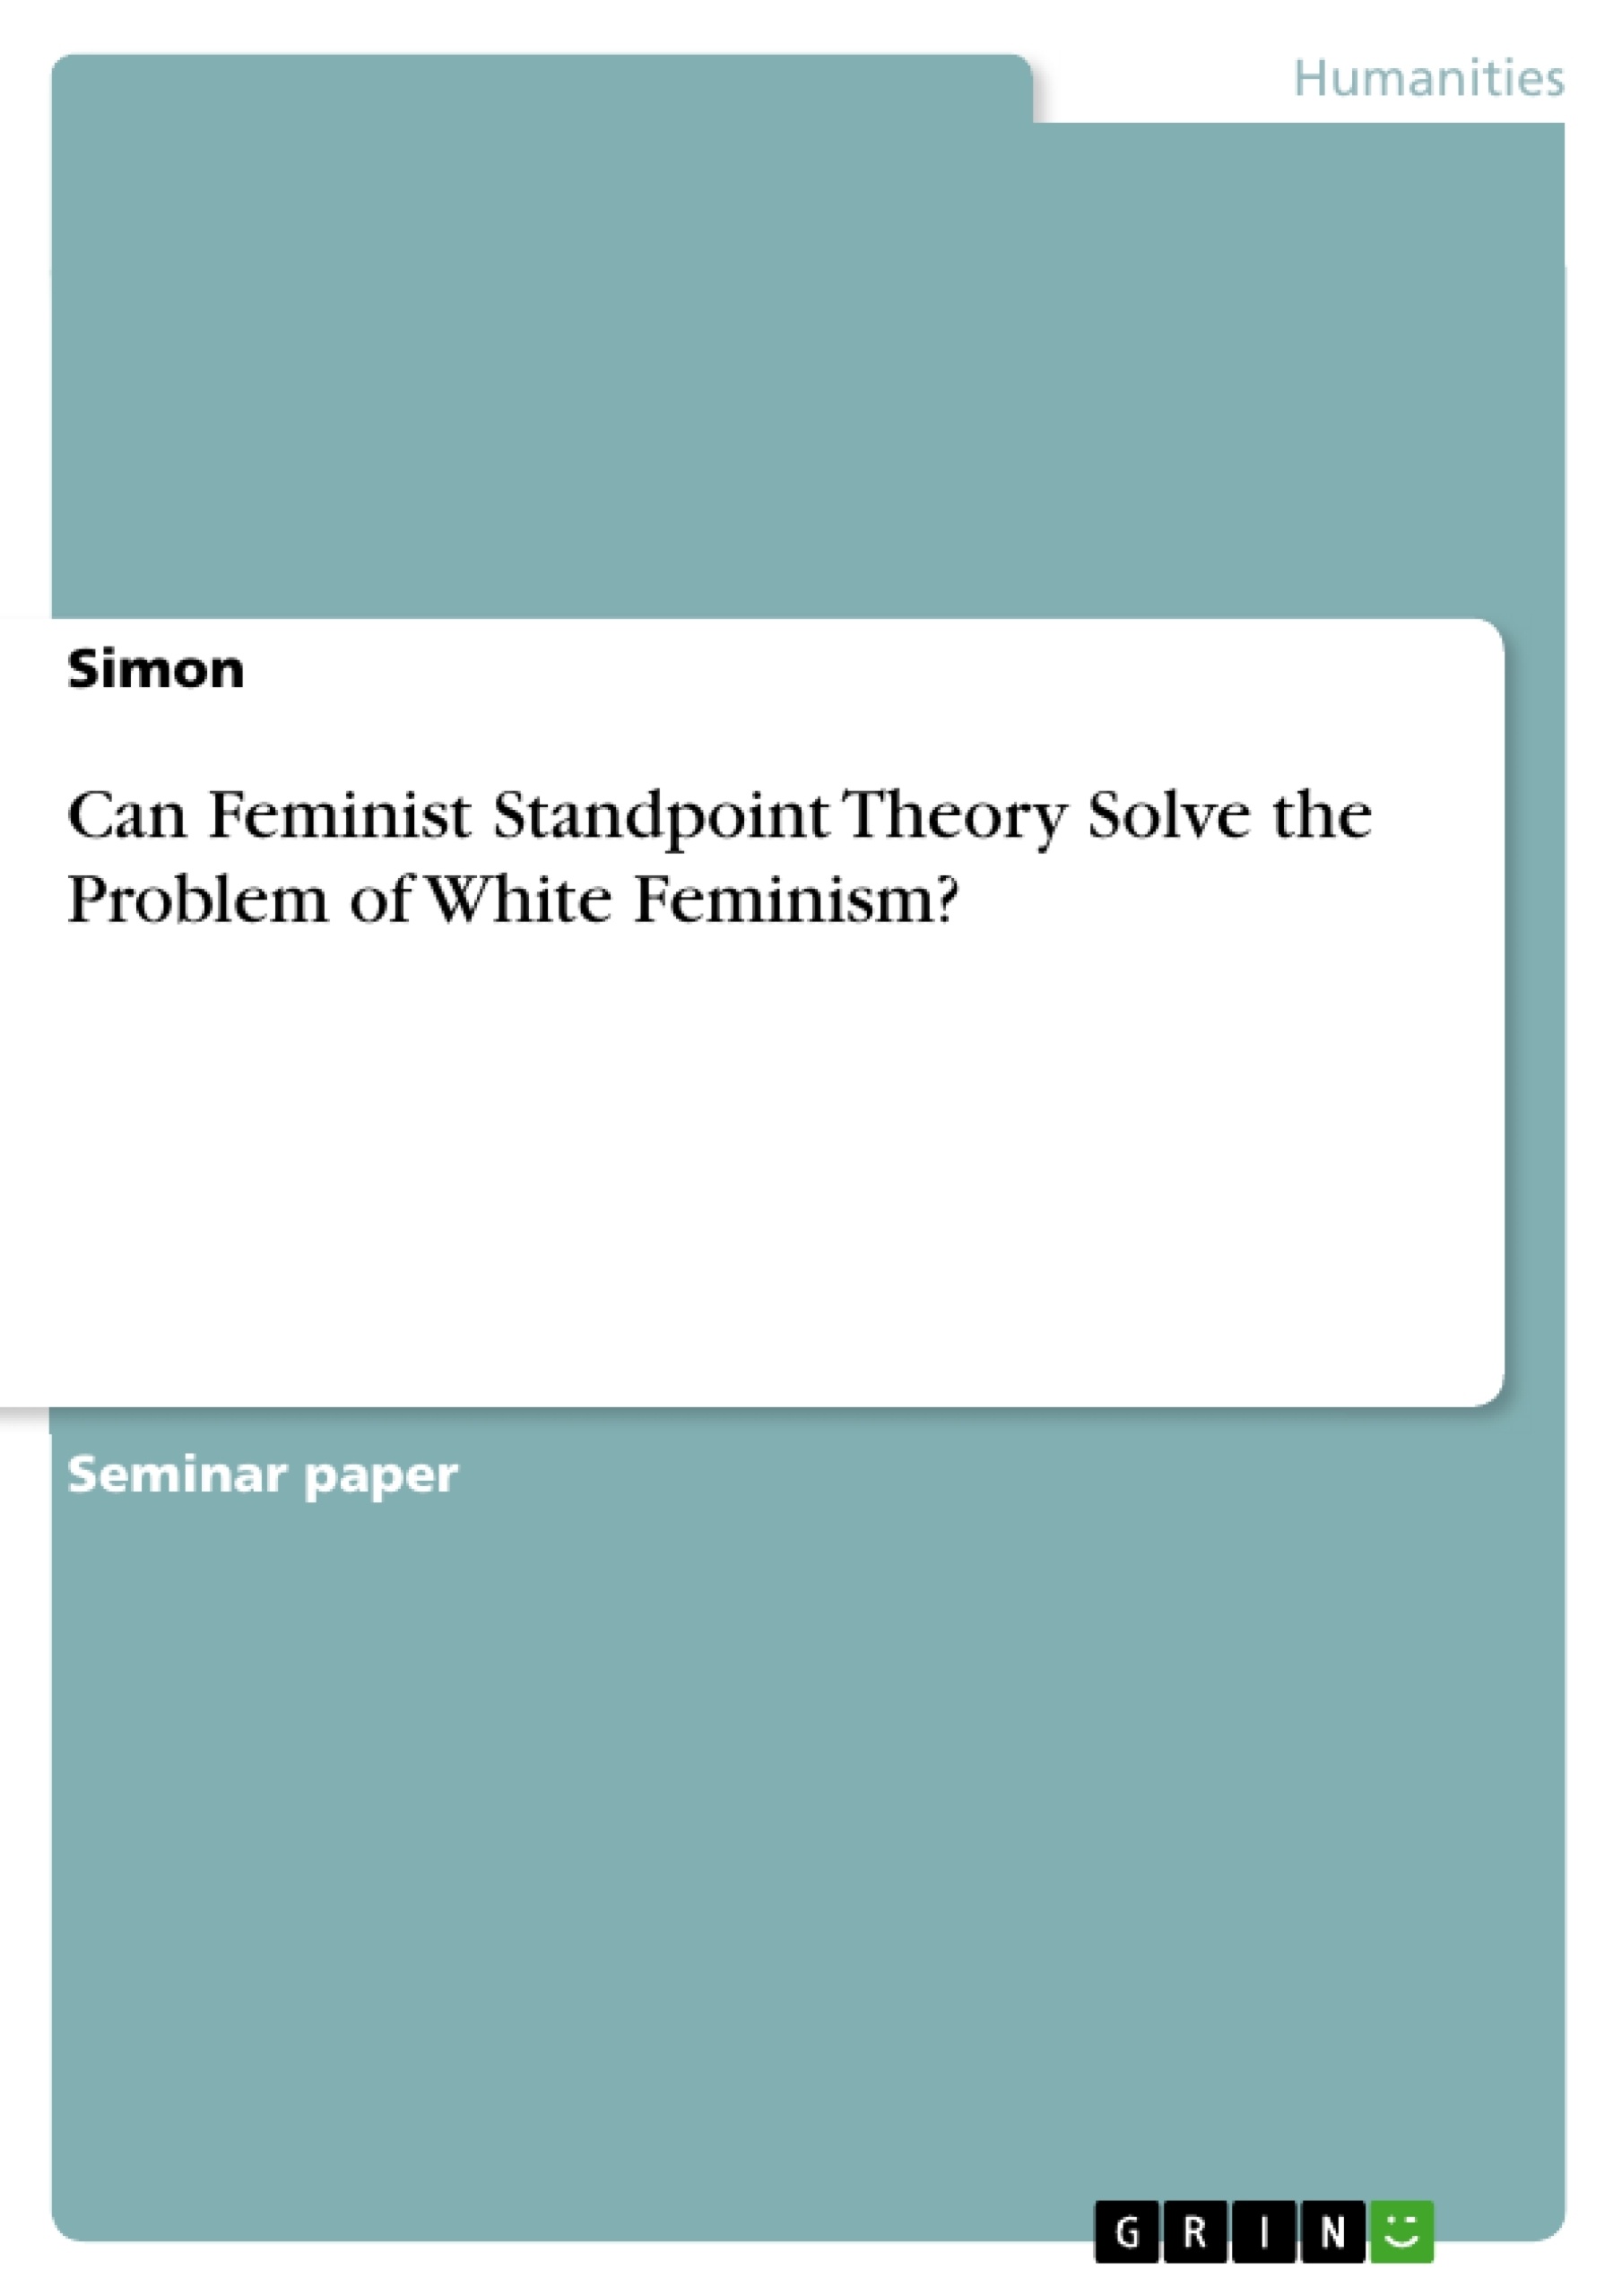 Title: Can Feminist Standpoint Theory Solve the Problem of White Feminism?